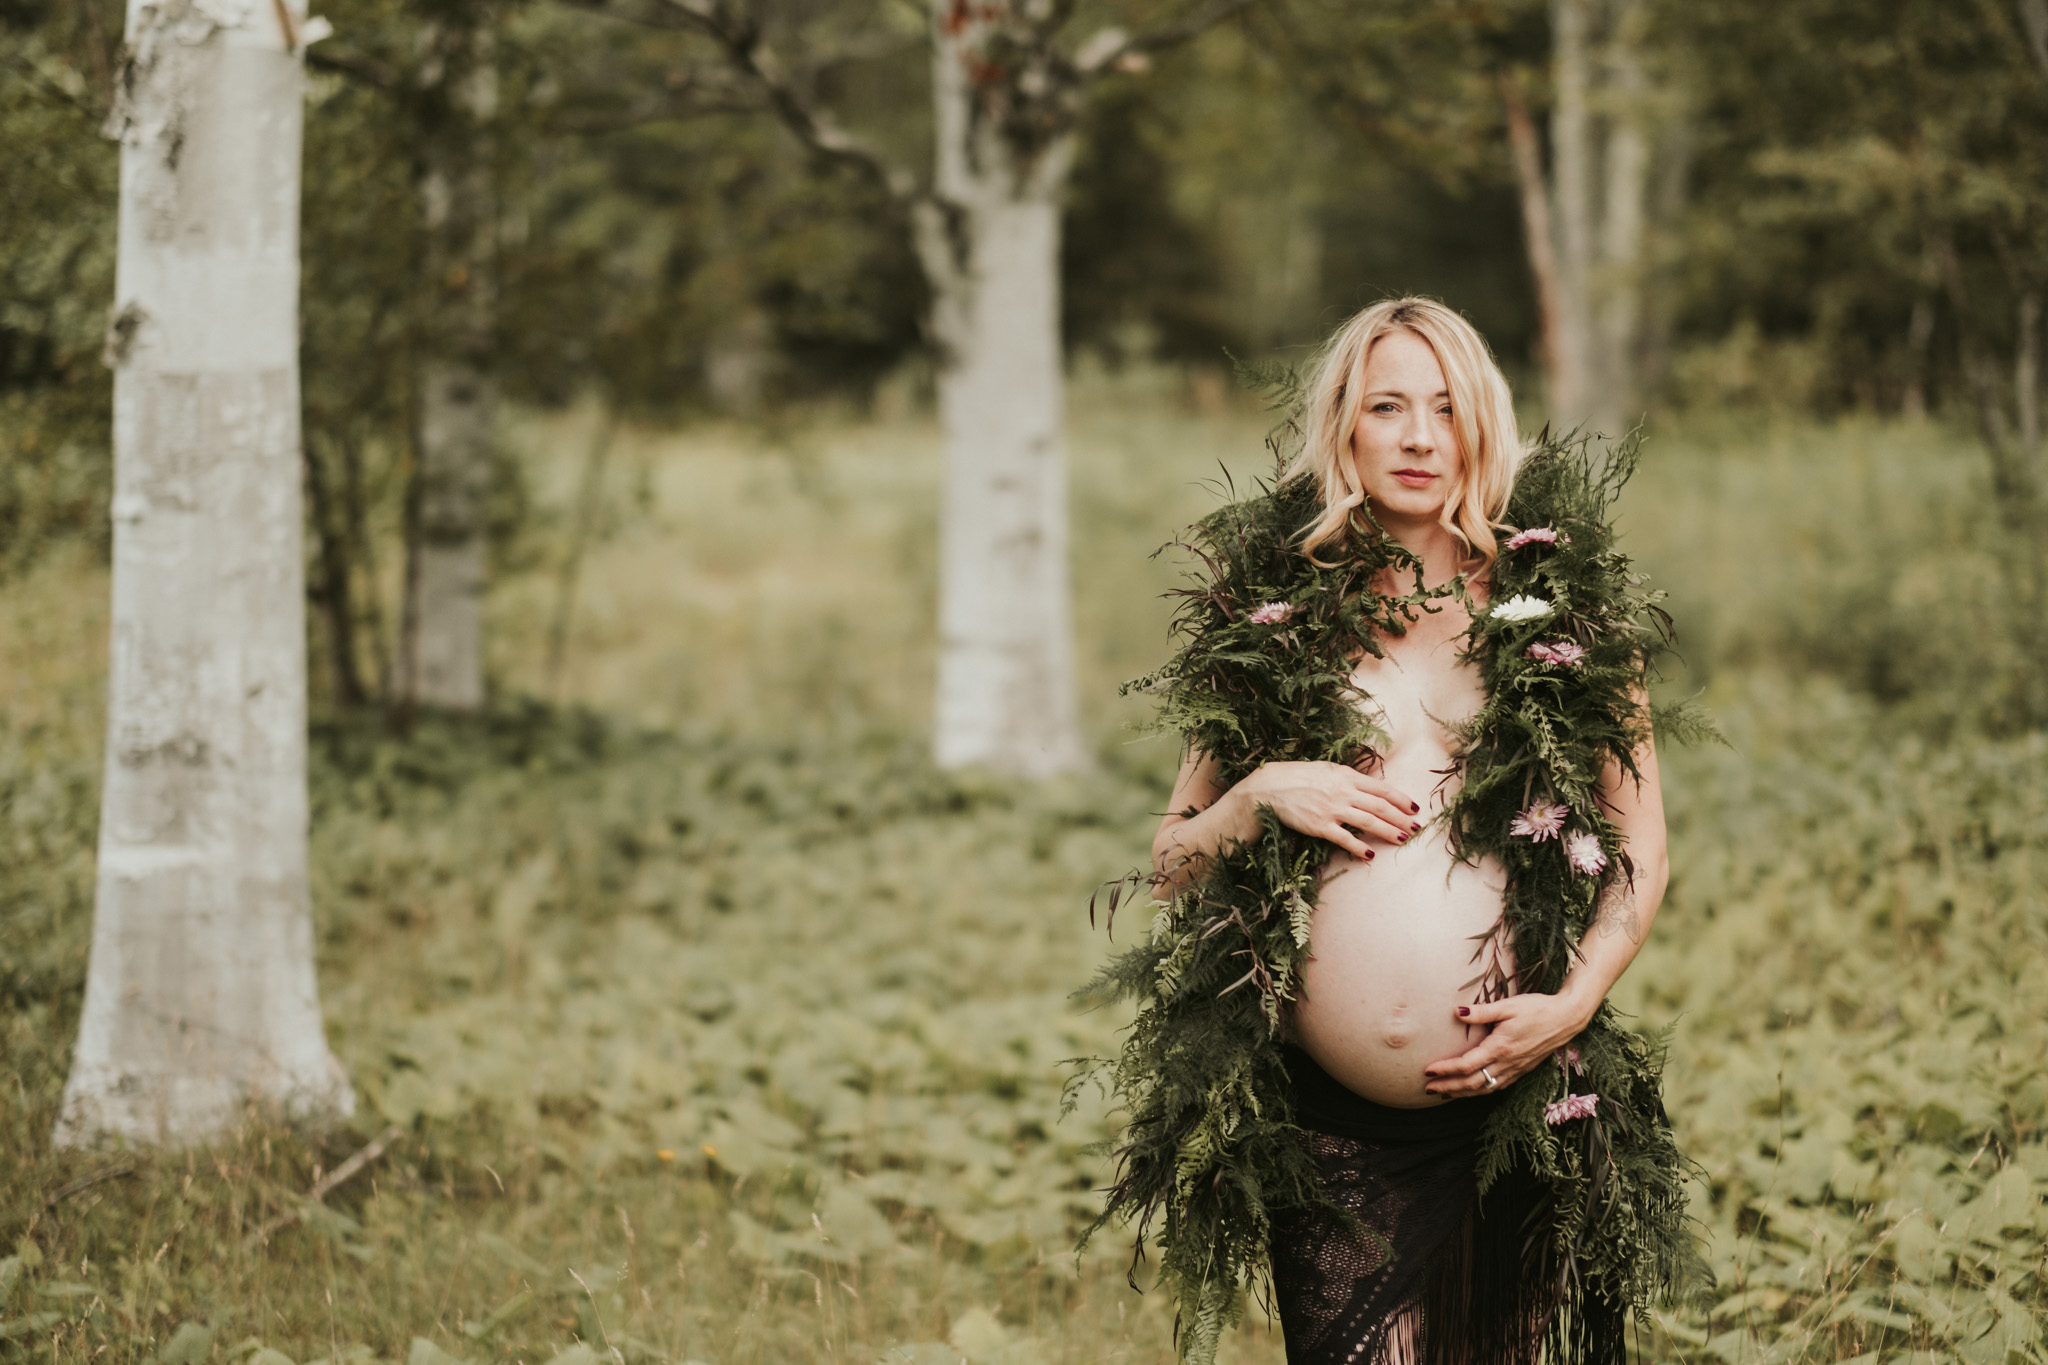 Pregnant woman in forest draped in greenery